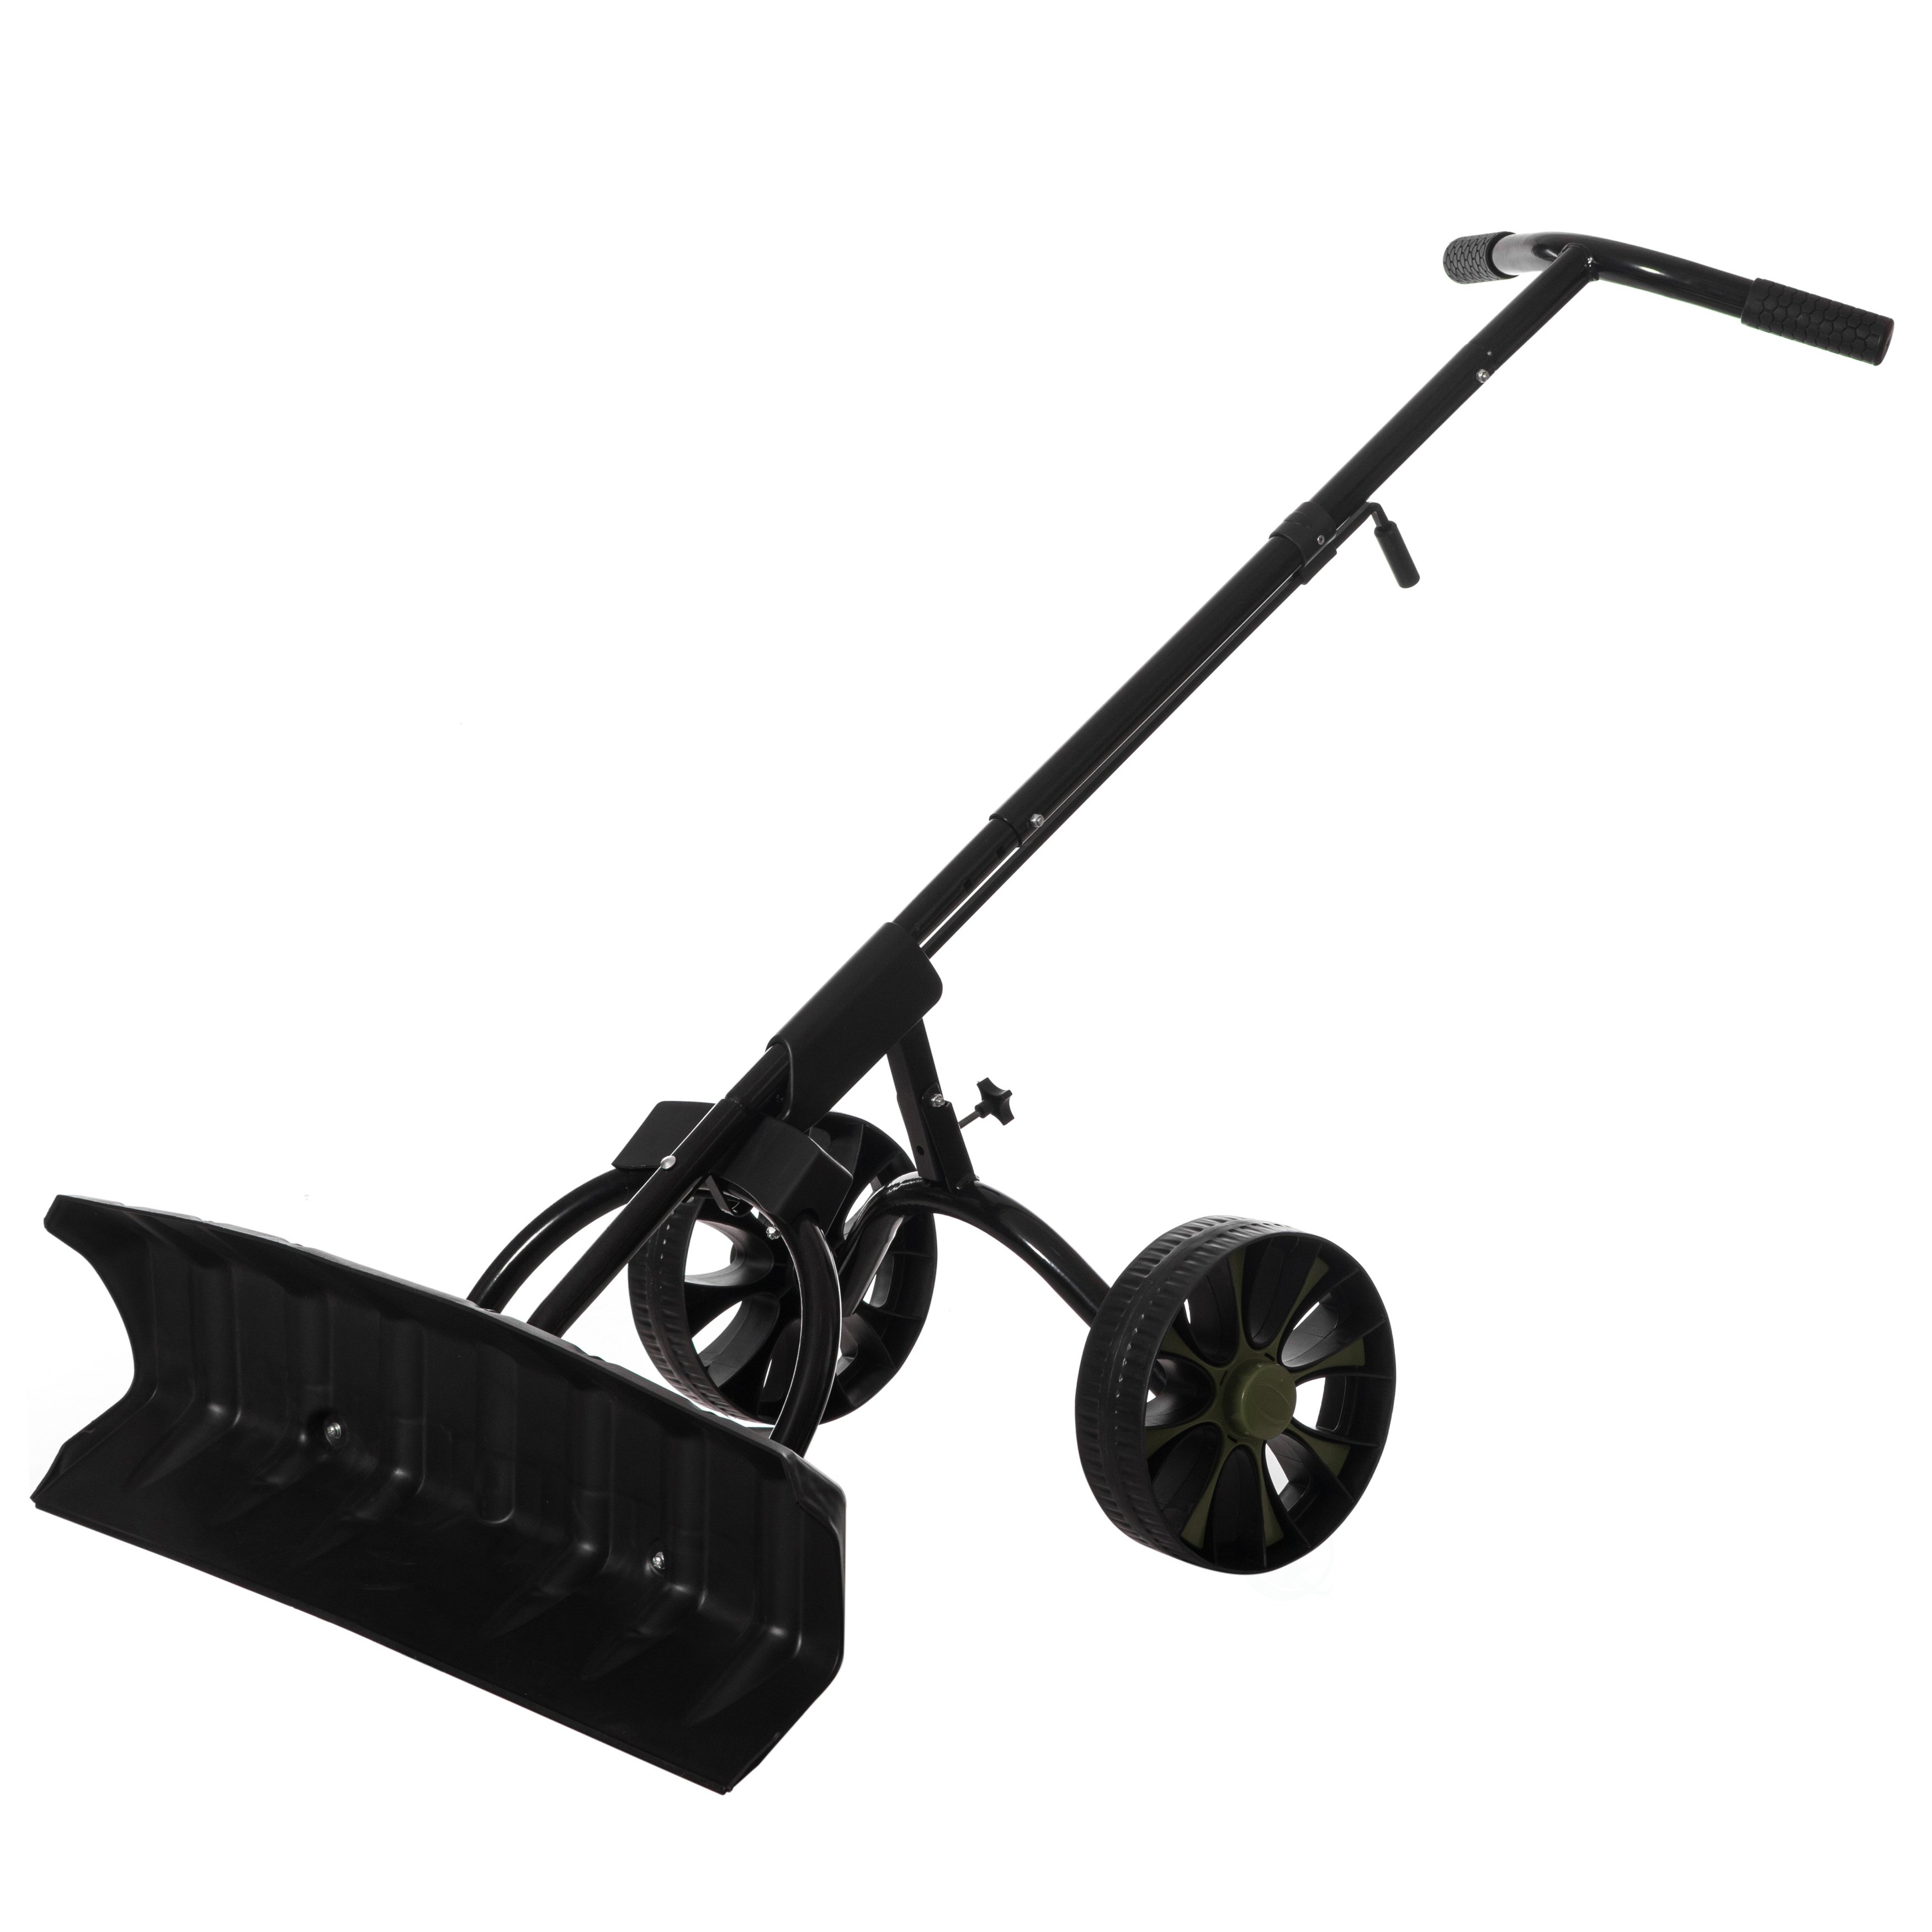 Extra Wide 36 in. Snow Shovel Plow Pusher Remover with Large Rugged Wheels, Heavy Duty, Black